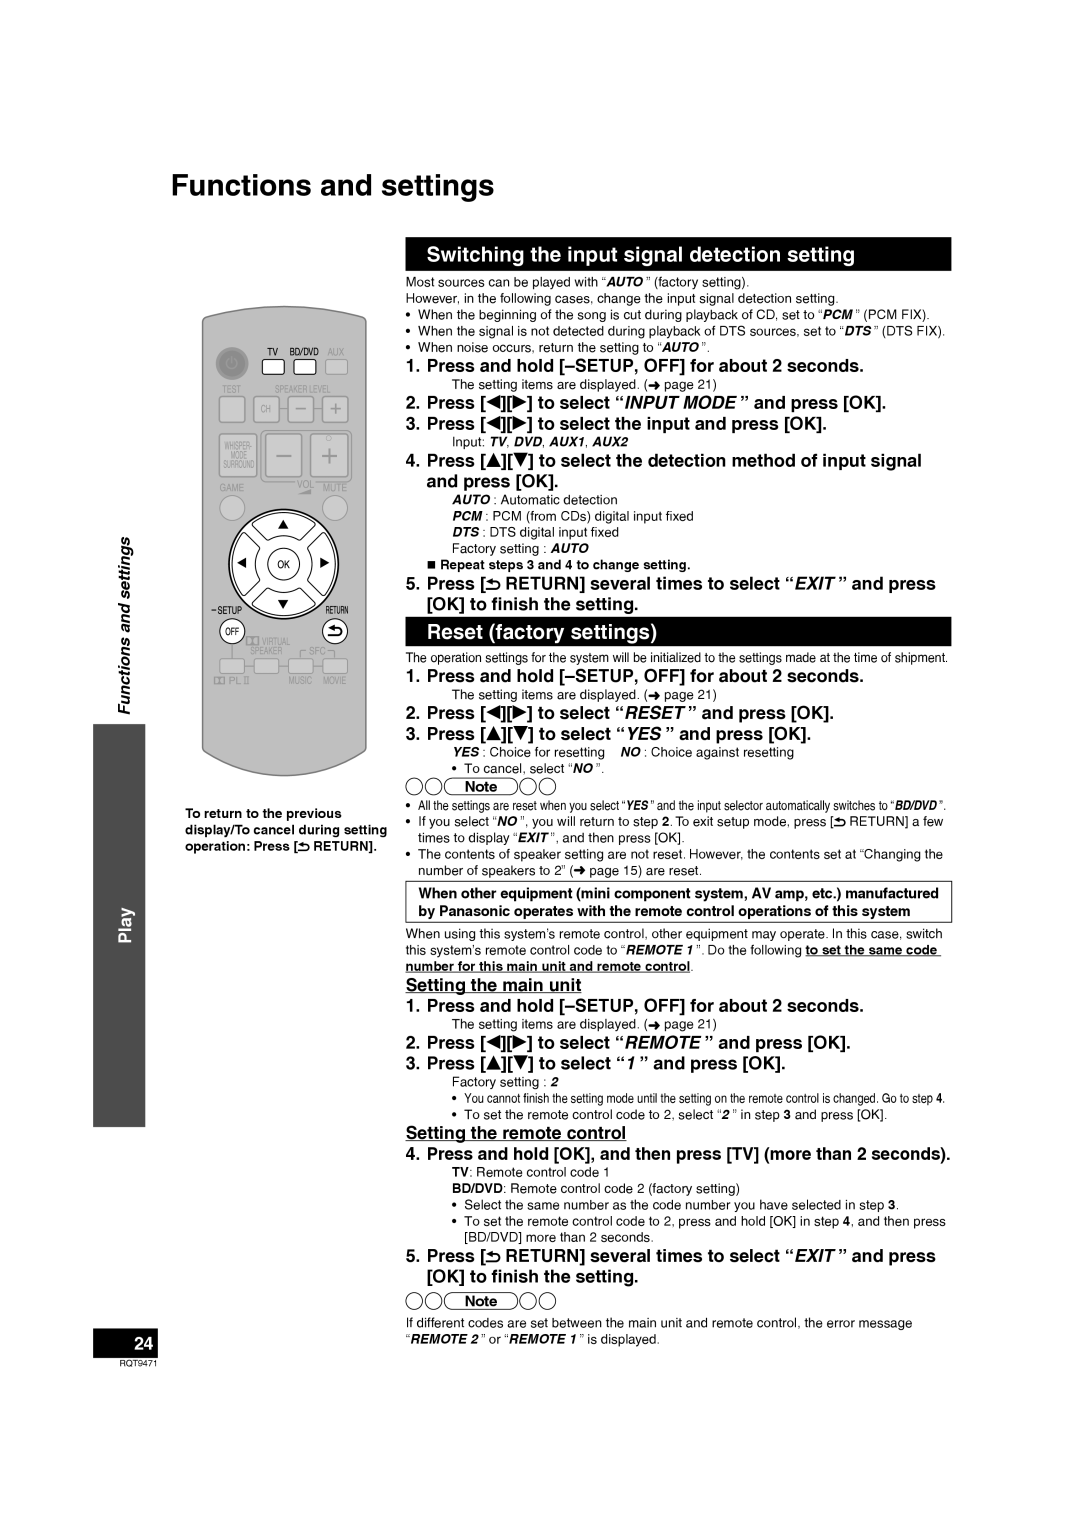 Panasonic SC-ZT1 Switching the input signal detection setting, Reset factory settings, Play, Functions and settings 